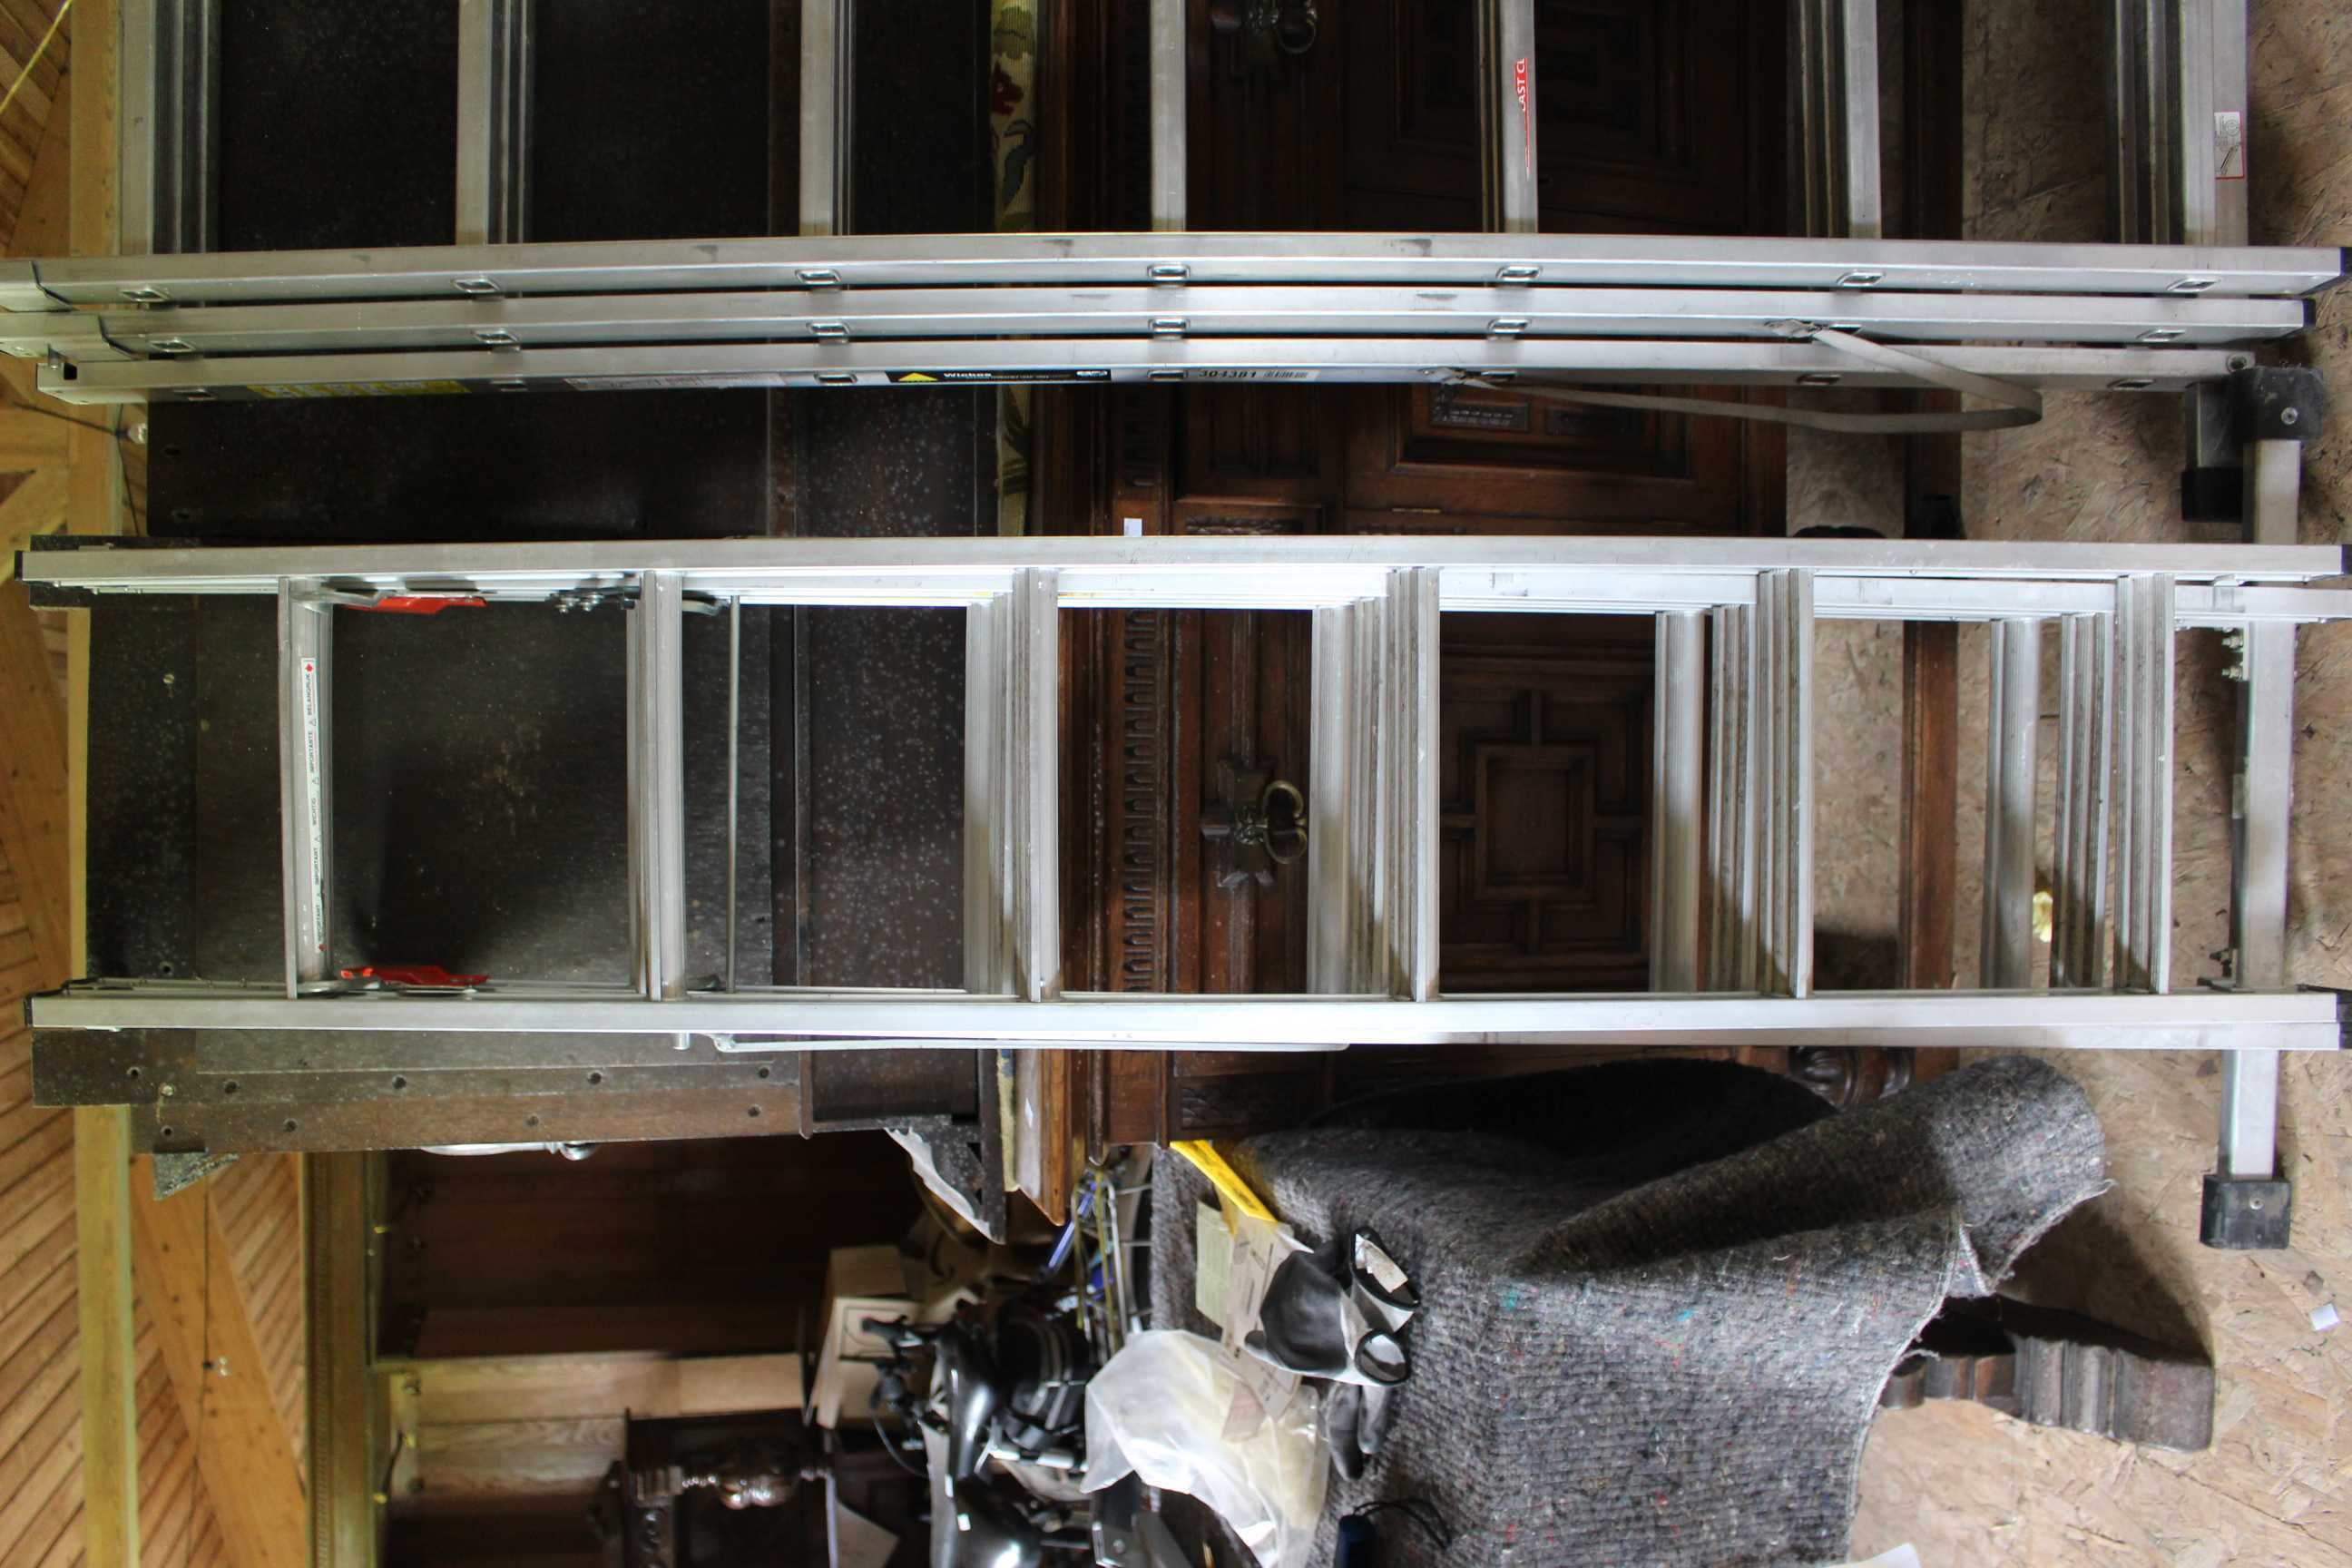 3 sets of household aluminium ladders. - Image 2 of 4